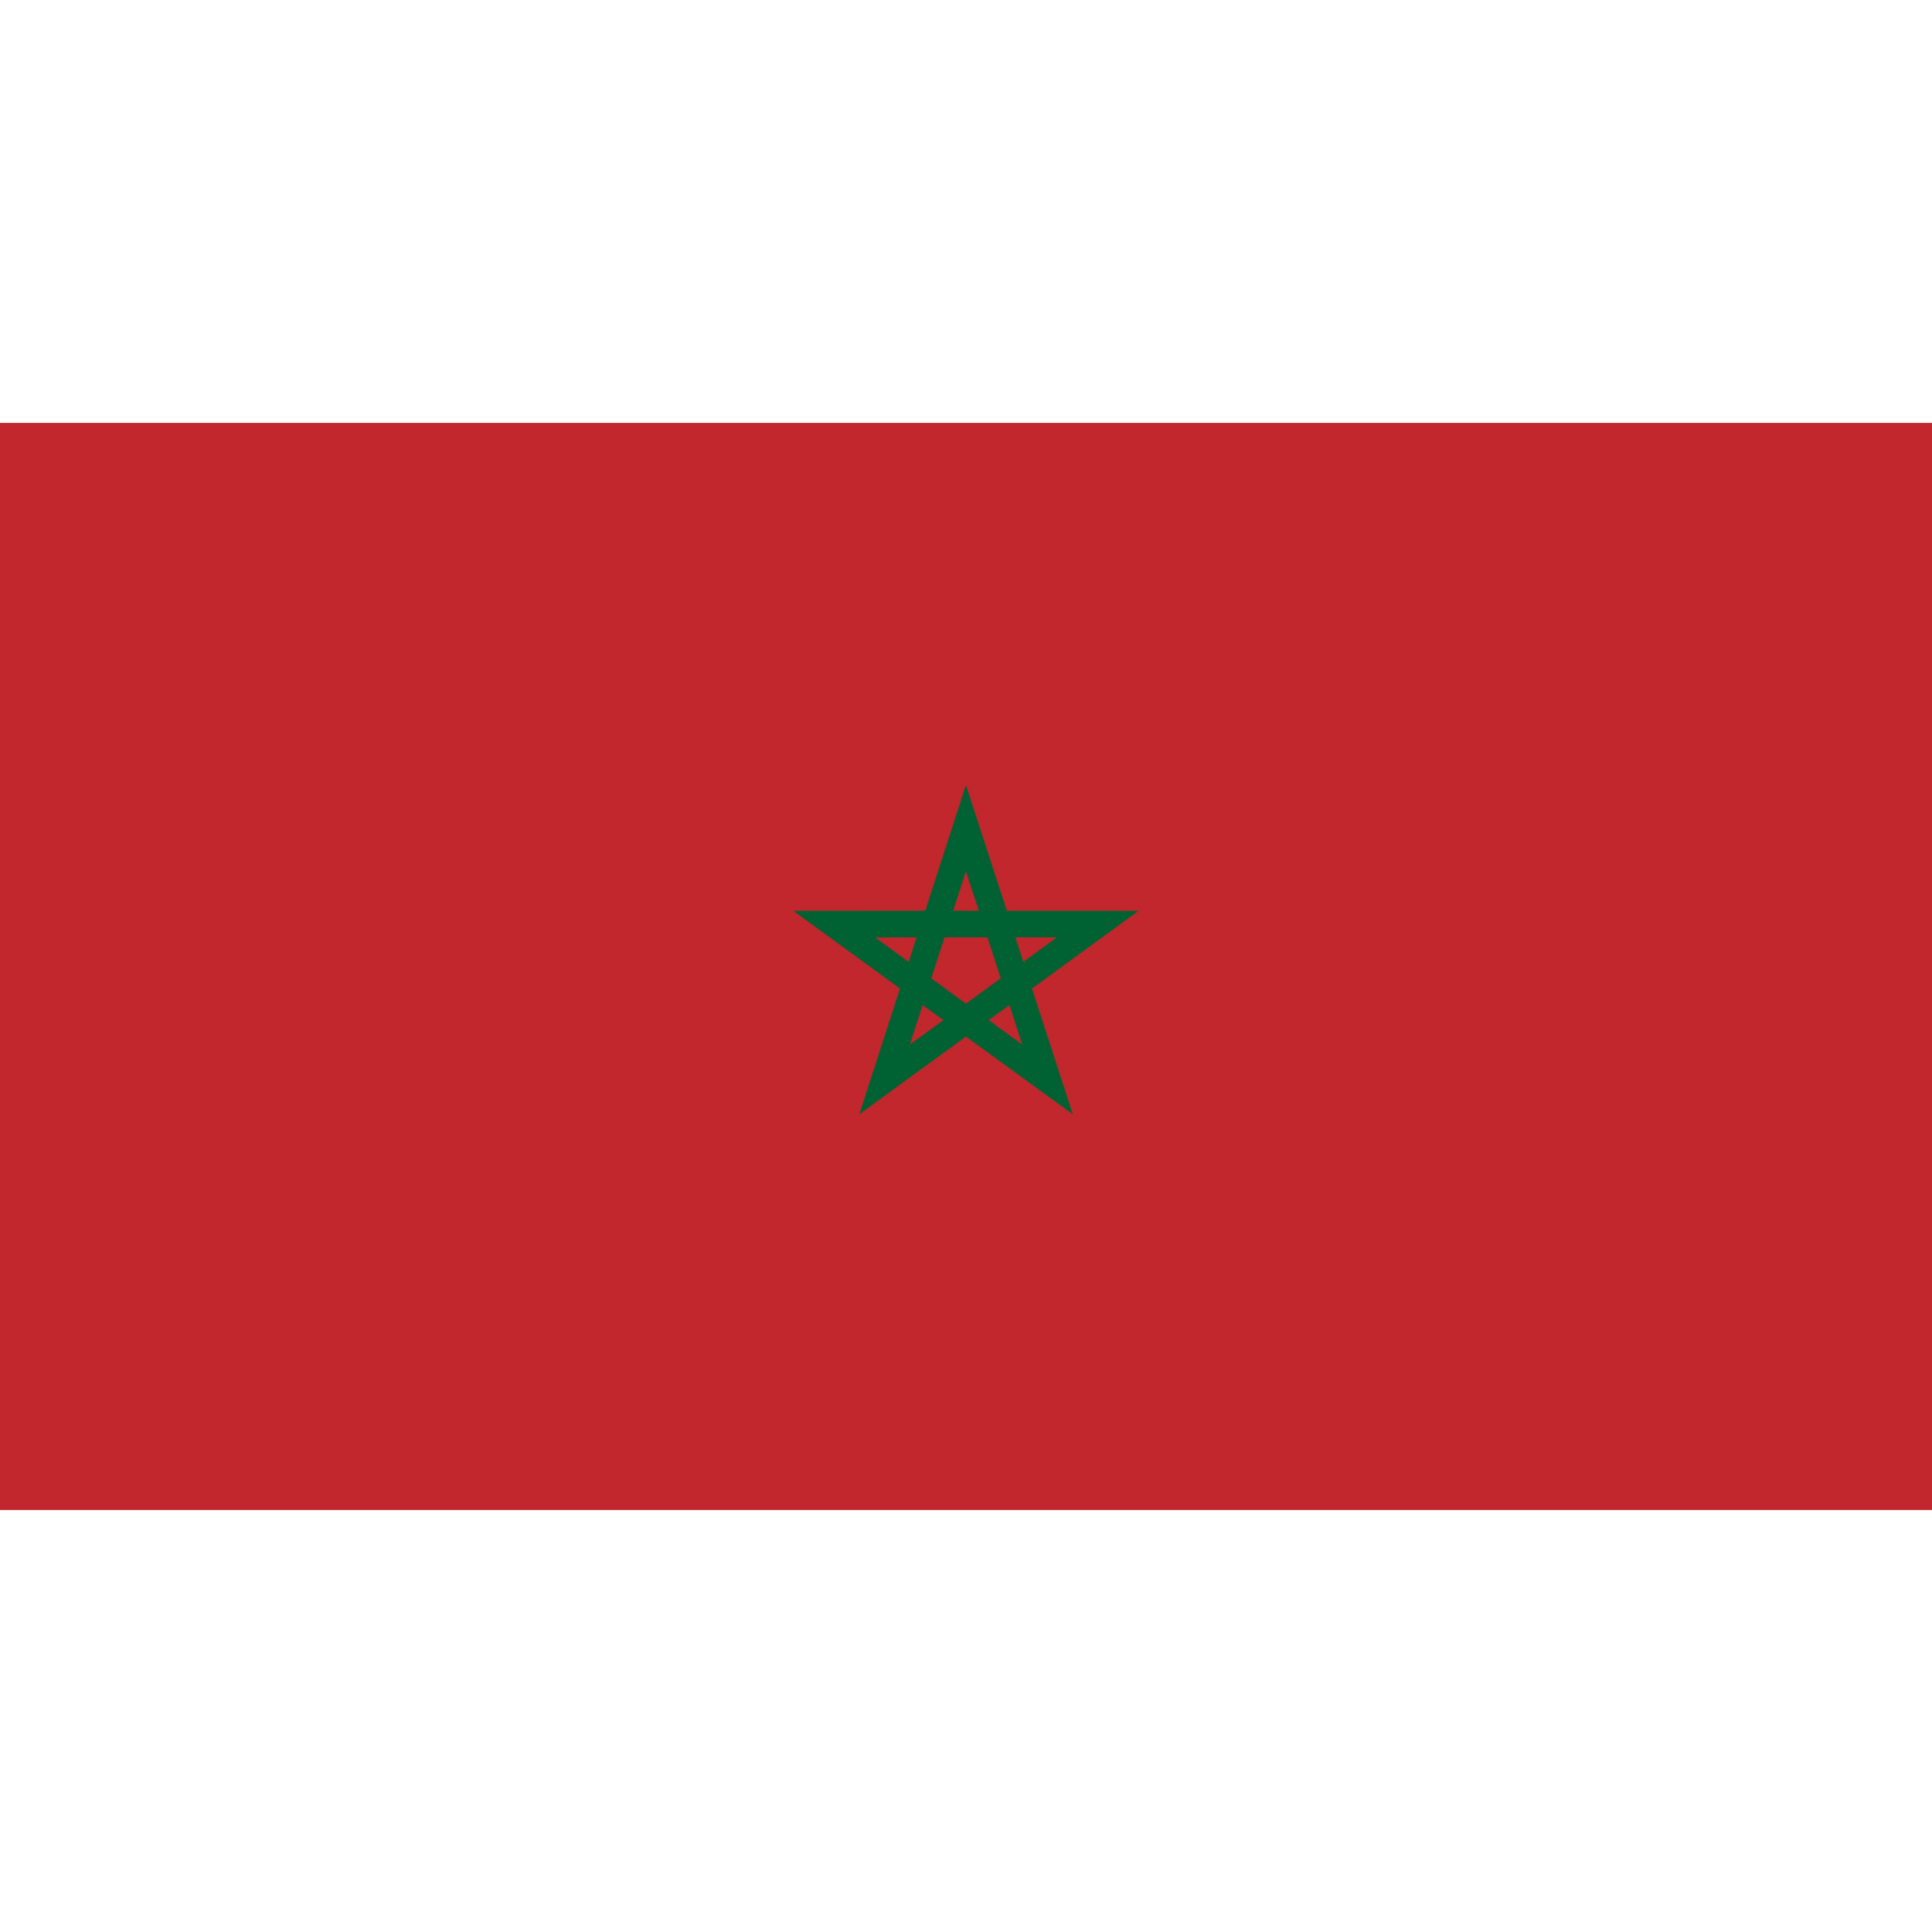 The flag of Morocco is a rectangular red background with a green star in the centre.